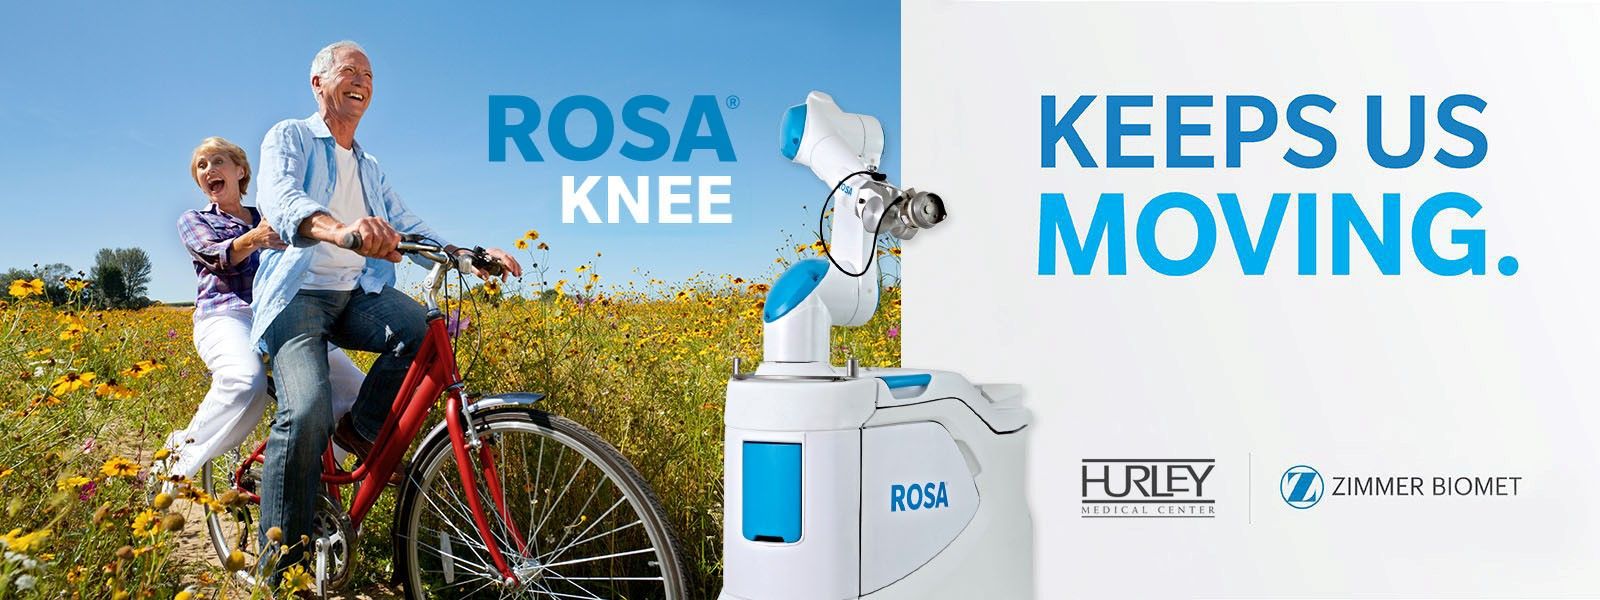 Contact Me About ROSA Knee